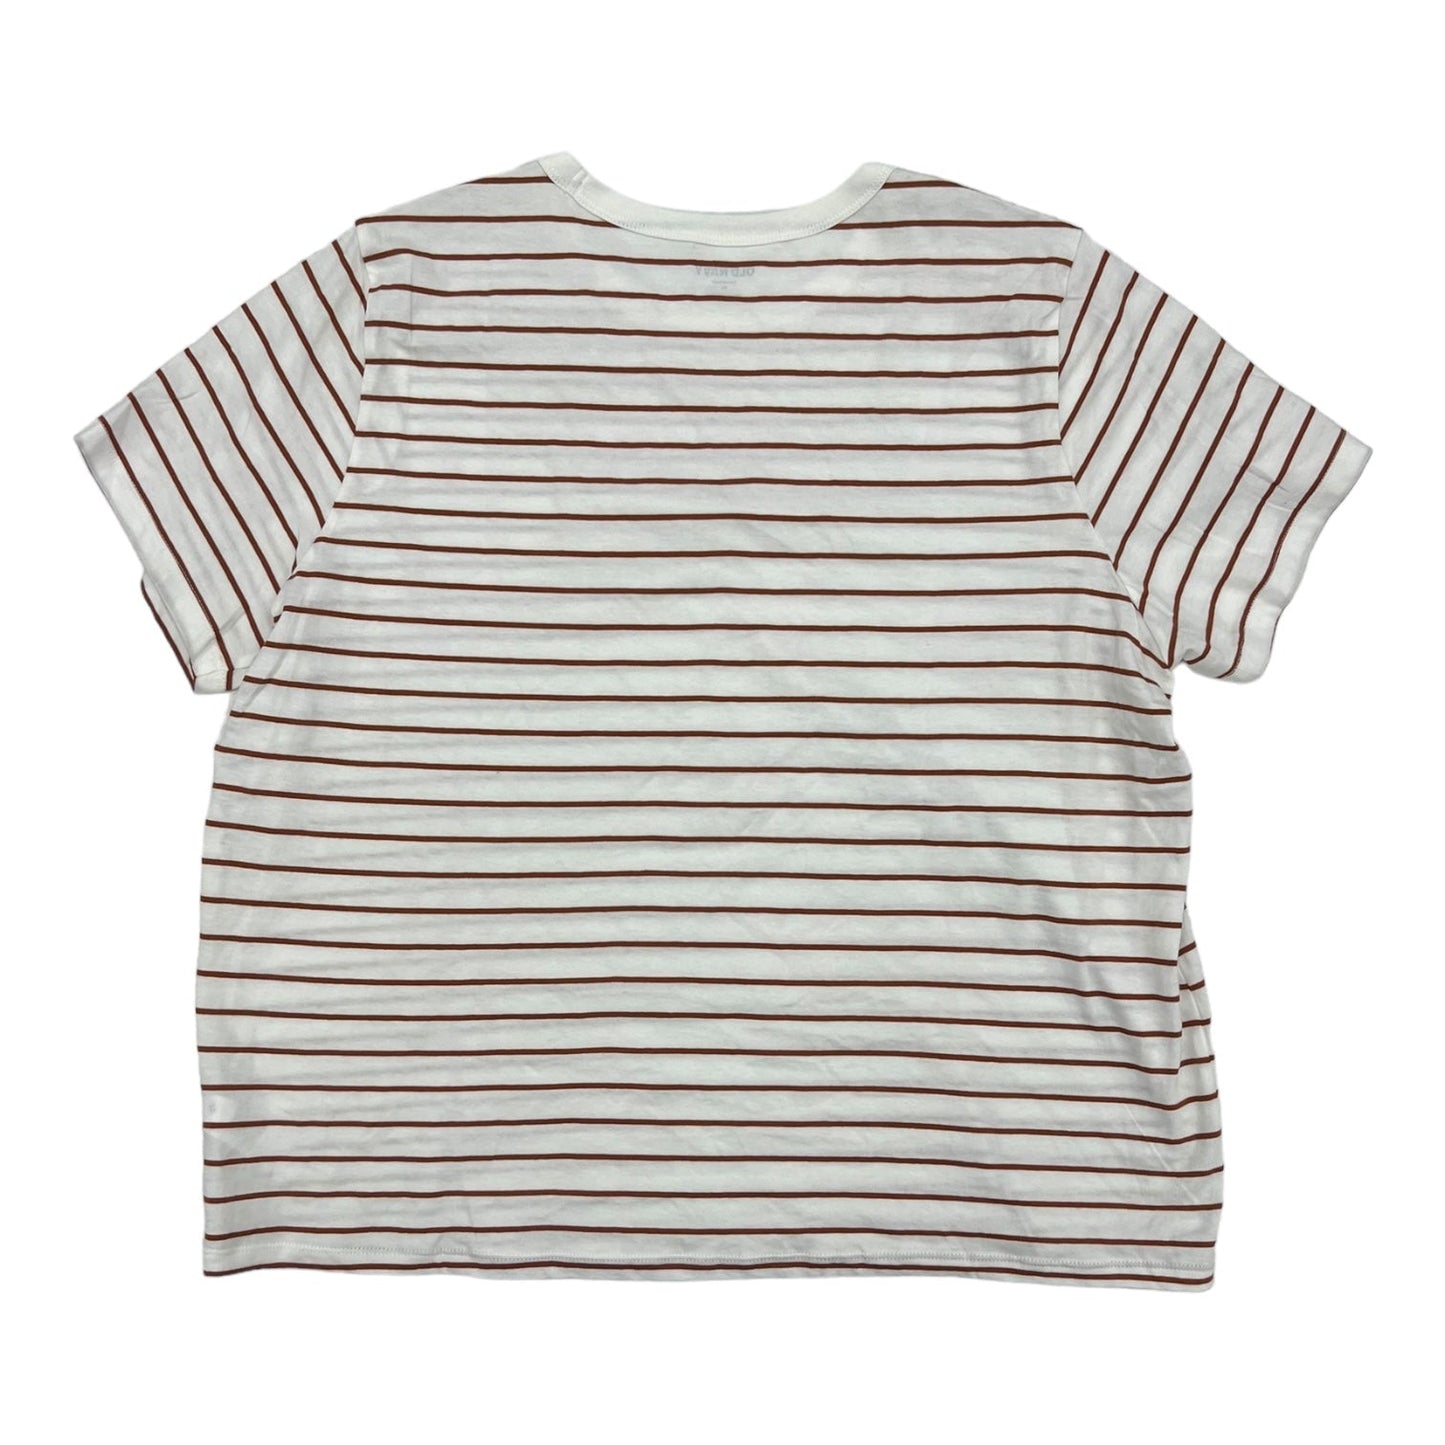 STRIPED PATTERN TOP SS by OLD NAVY Size:XL